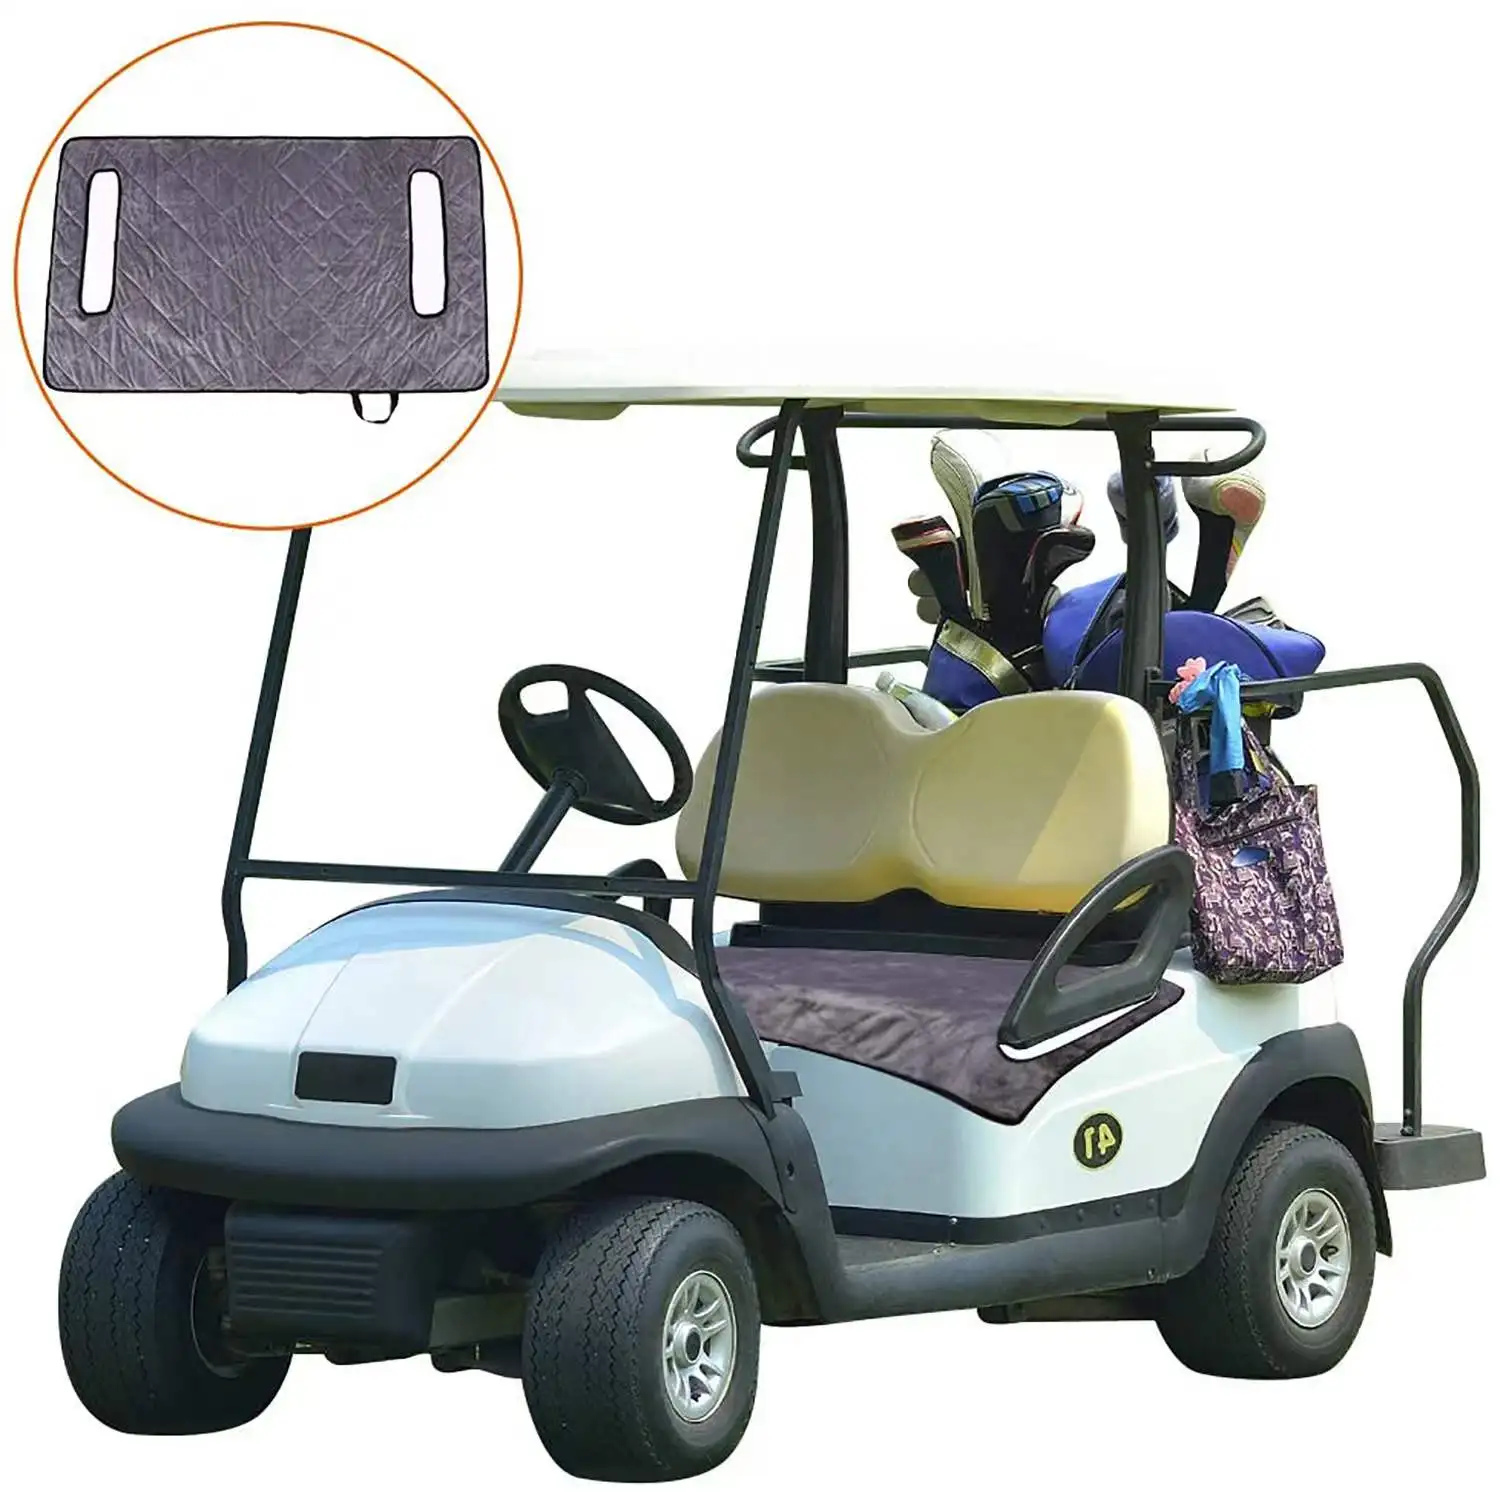 Cotton Golf towel seat cover 73x150cm golf cart seat blanket cover pattern